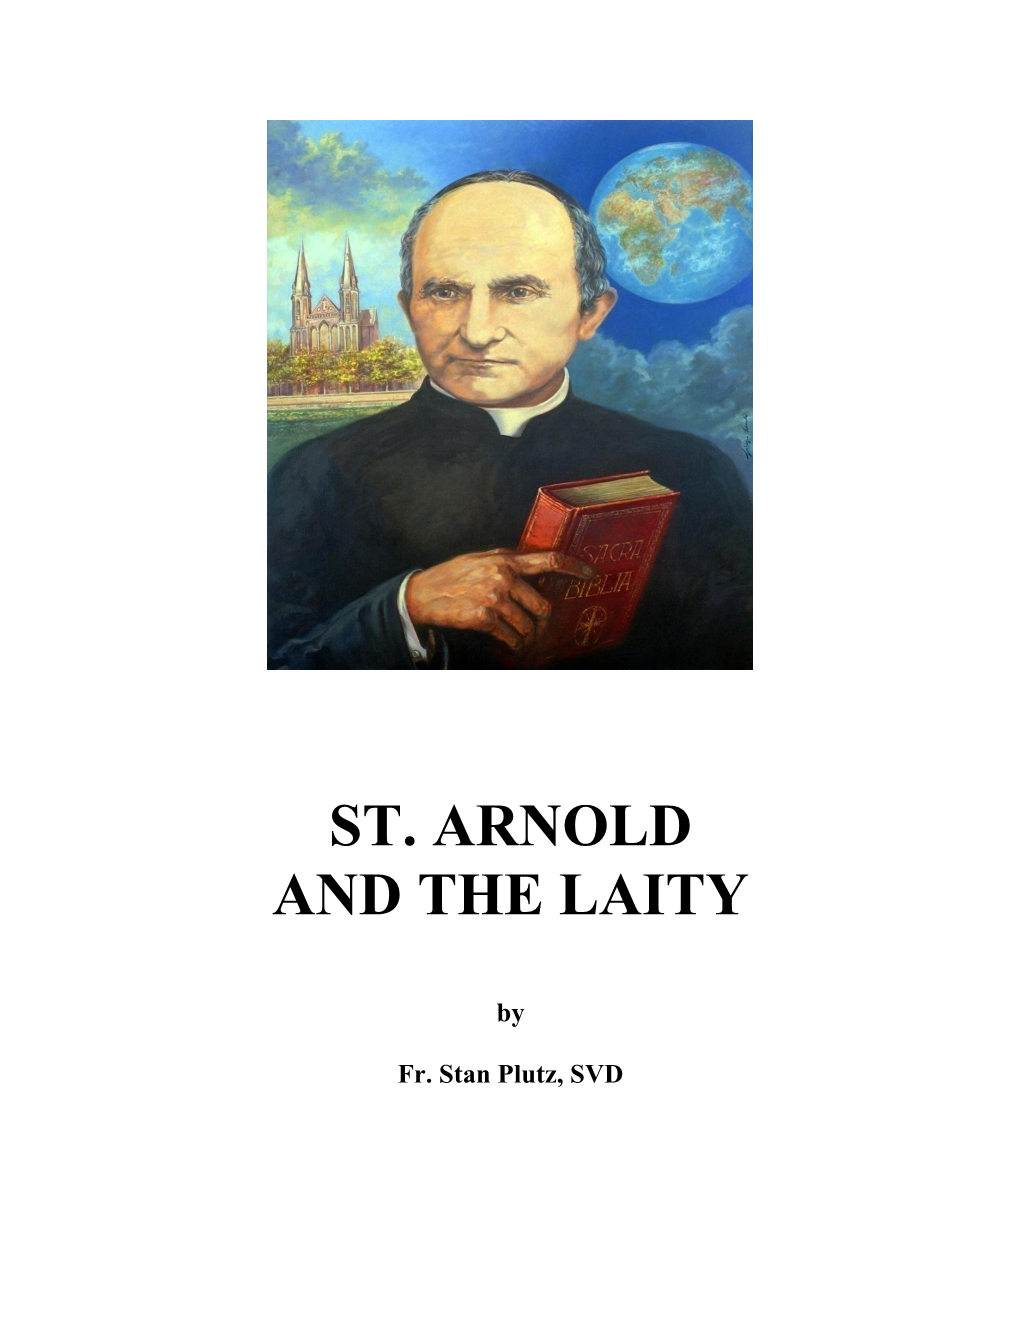 St. Arnold and the Laity